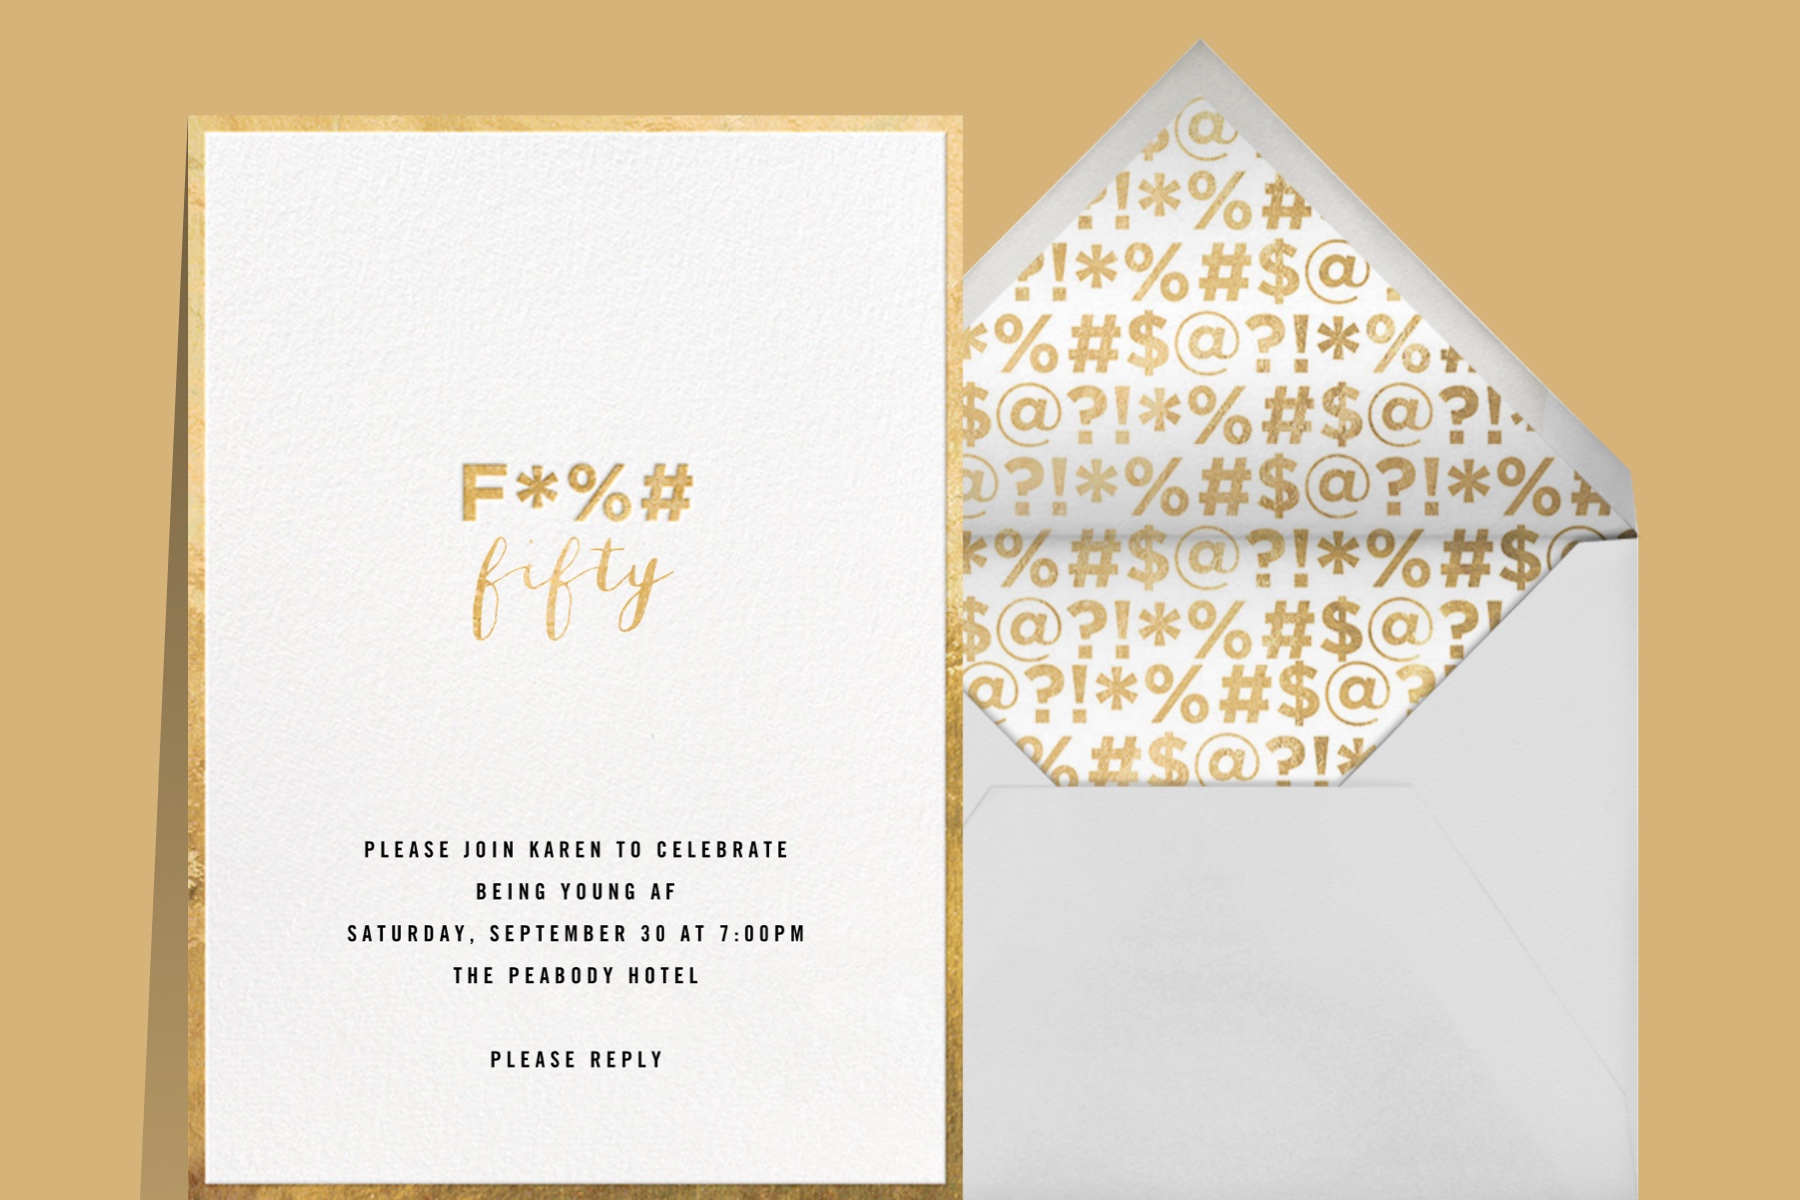 “The F Word” invitation by Cheree Berry Paper & Design for Paperless Post featuring graphic typography of the words “F*%# Fifty” on a beige background.